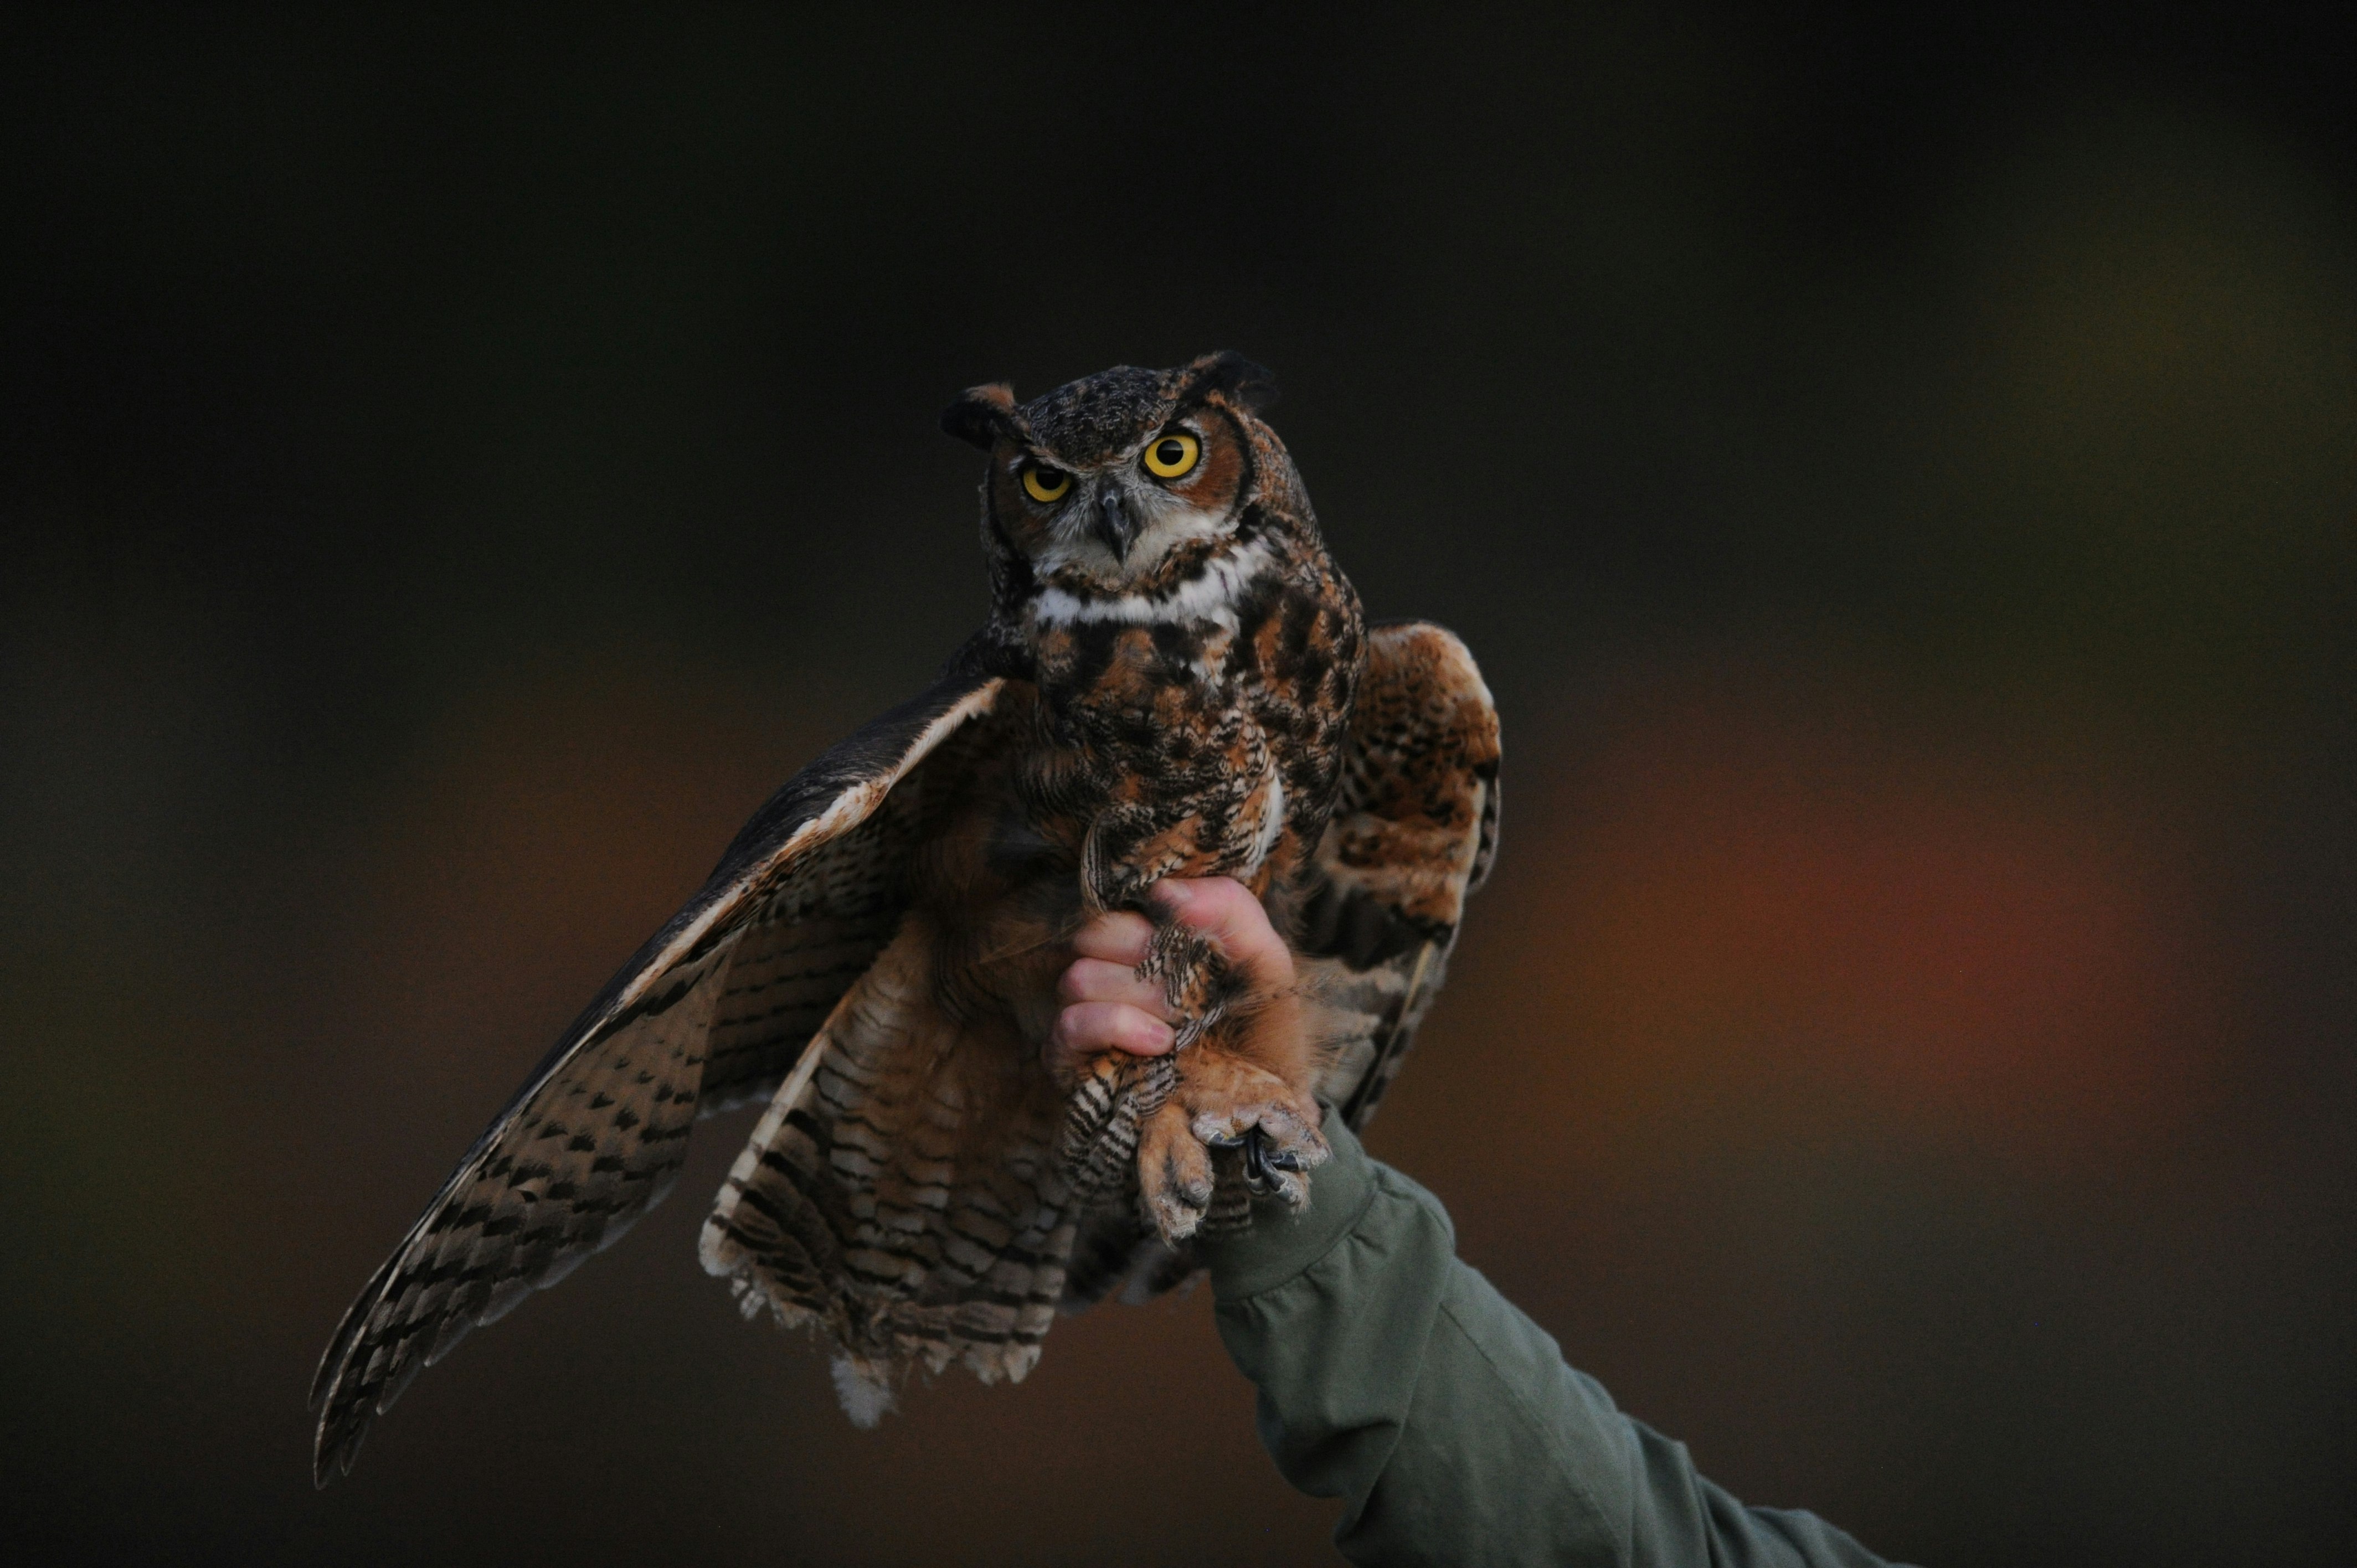 Image of an owl who appears caught by a human hand.